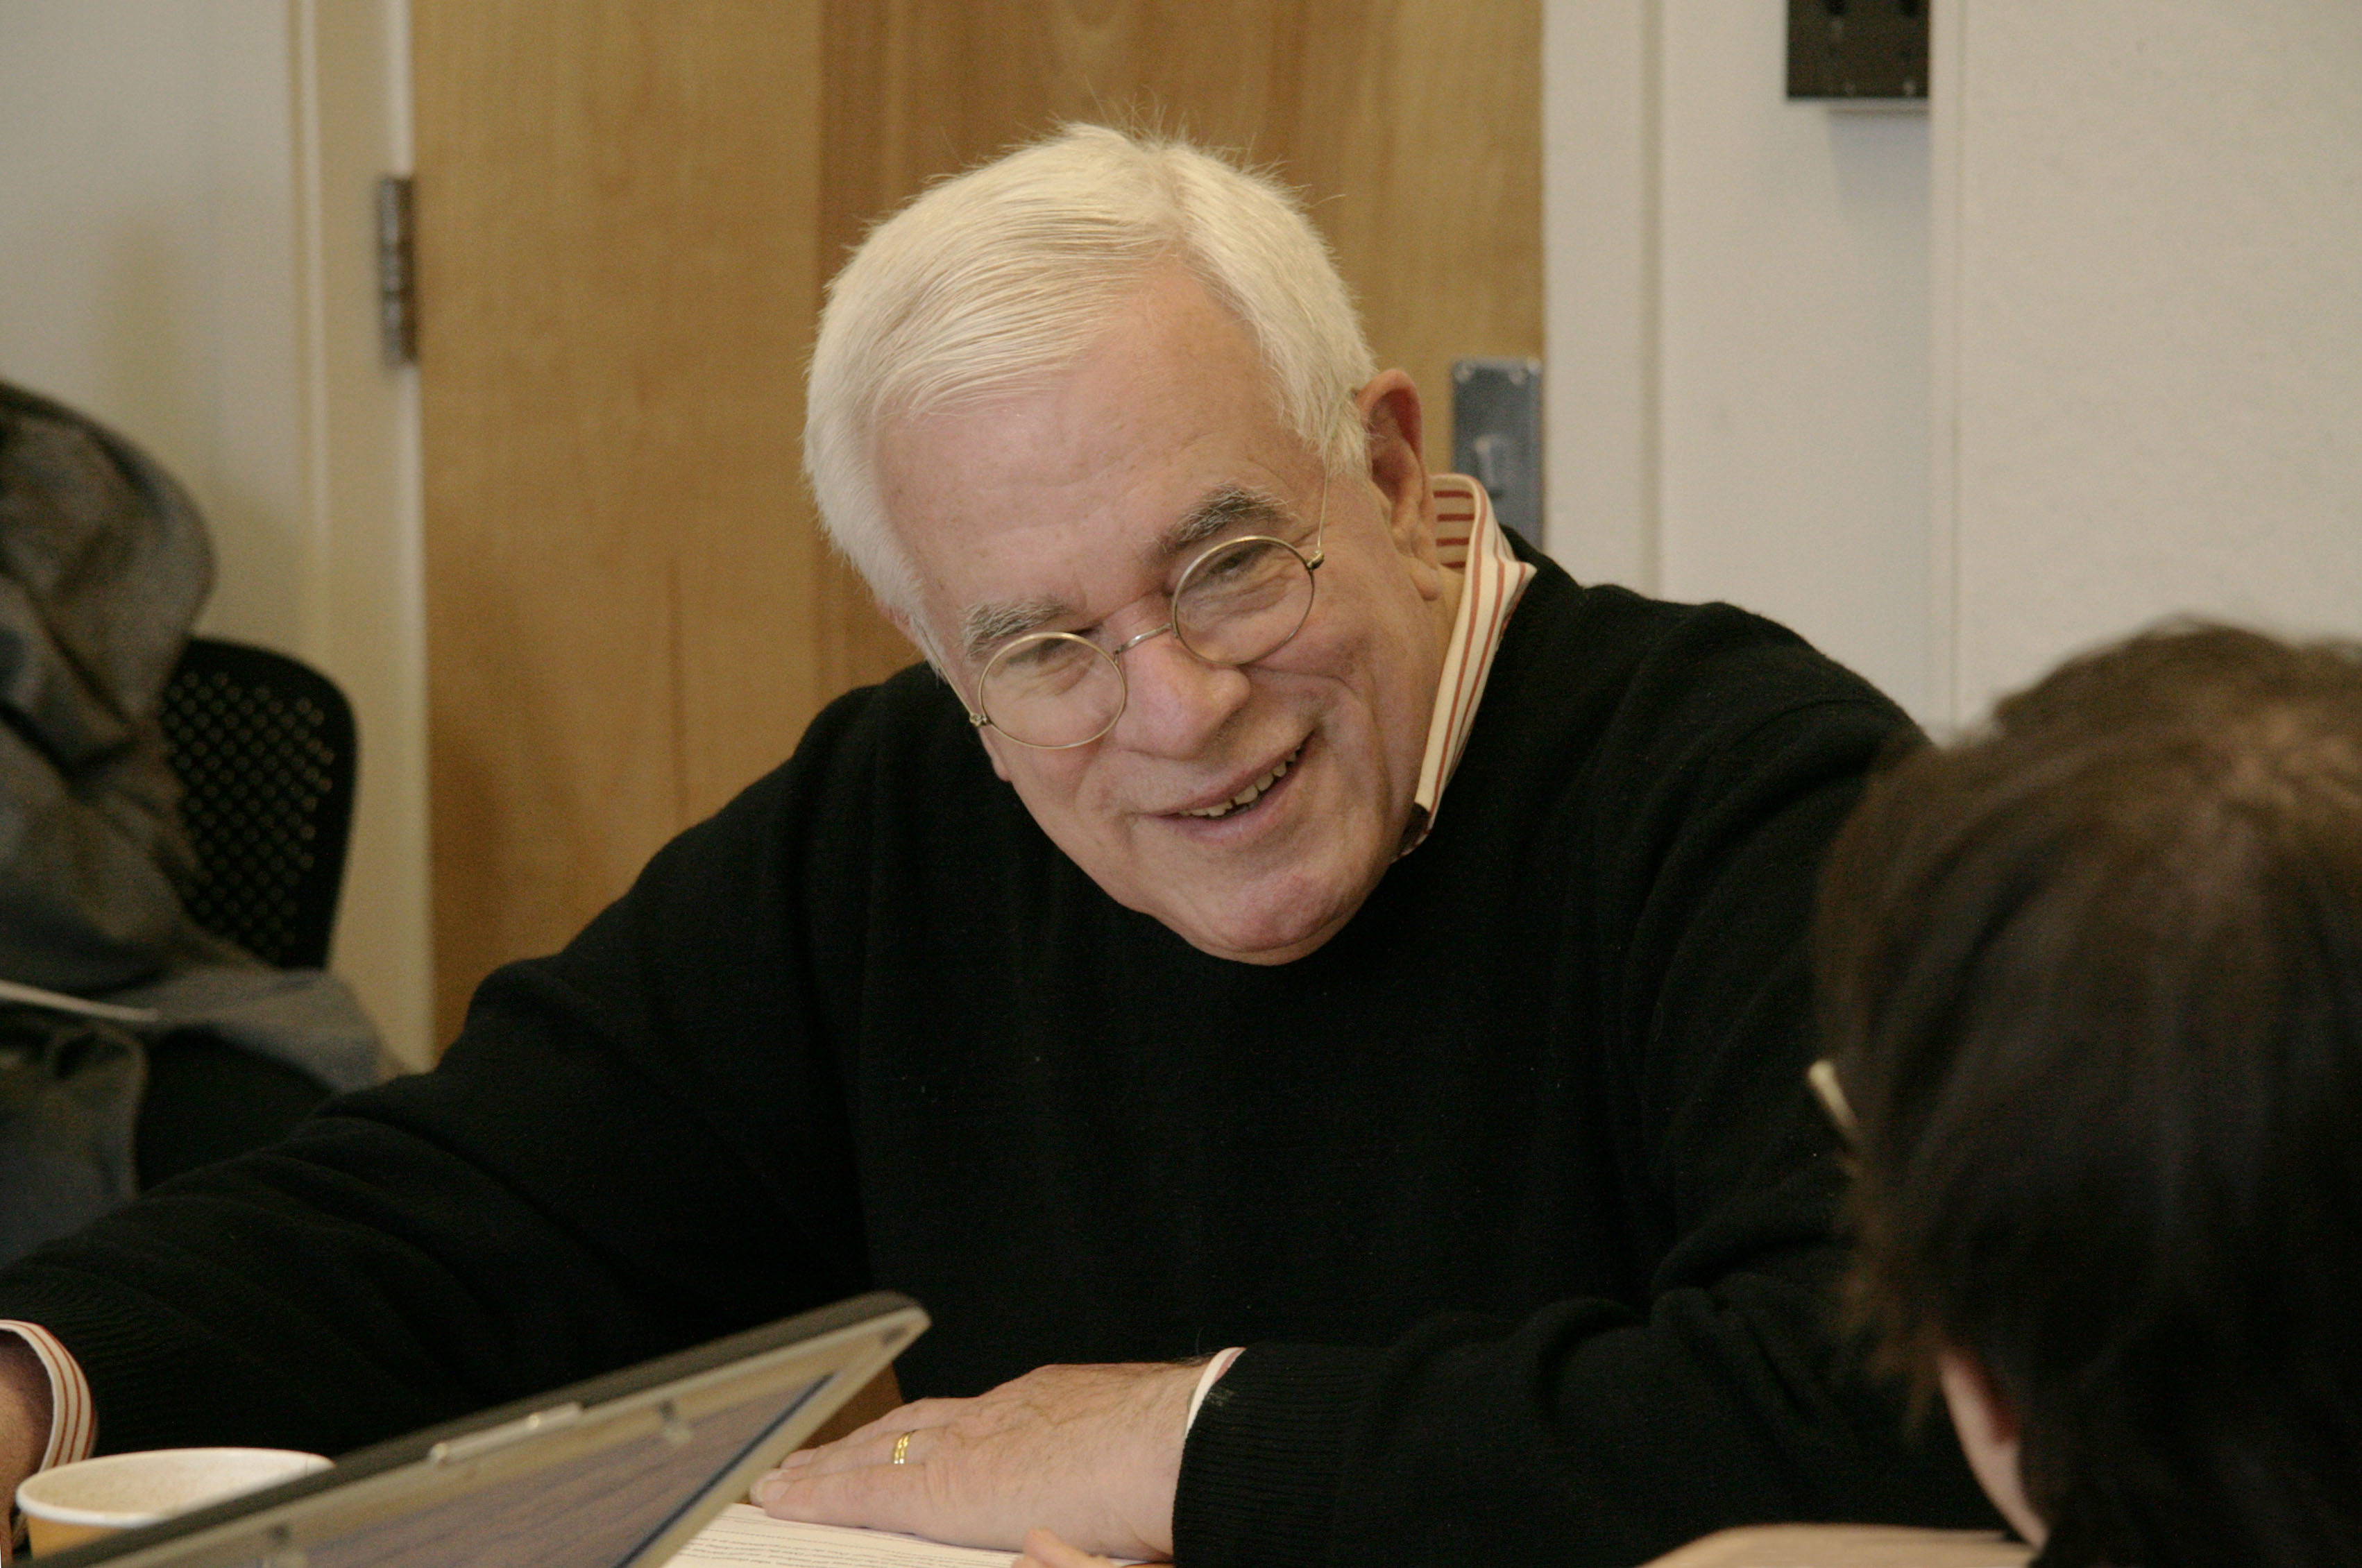 An older man sits at a table, engaging in conversation.